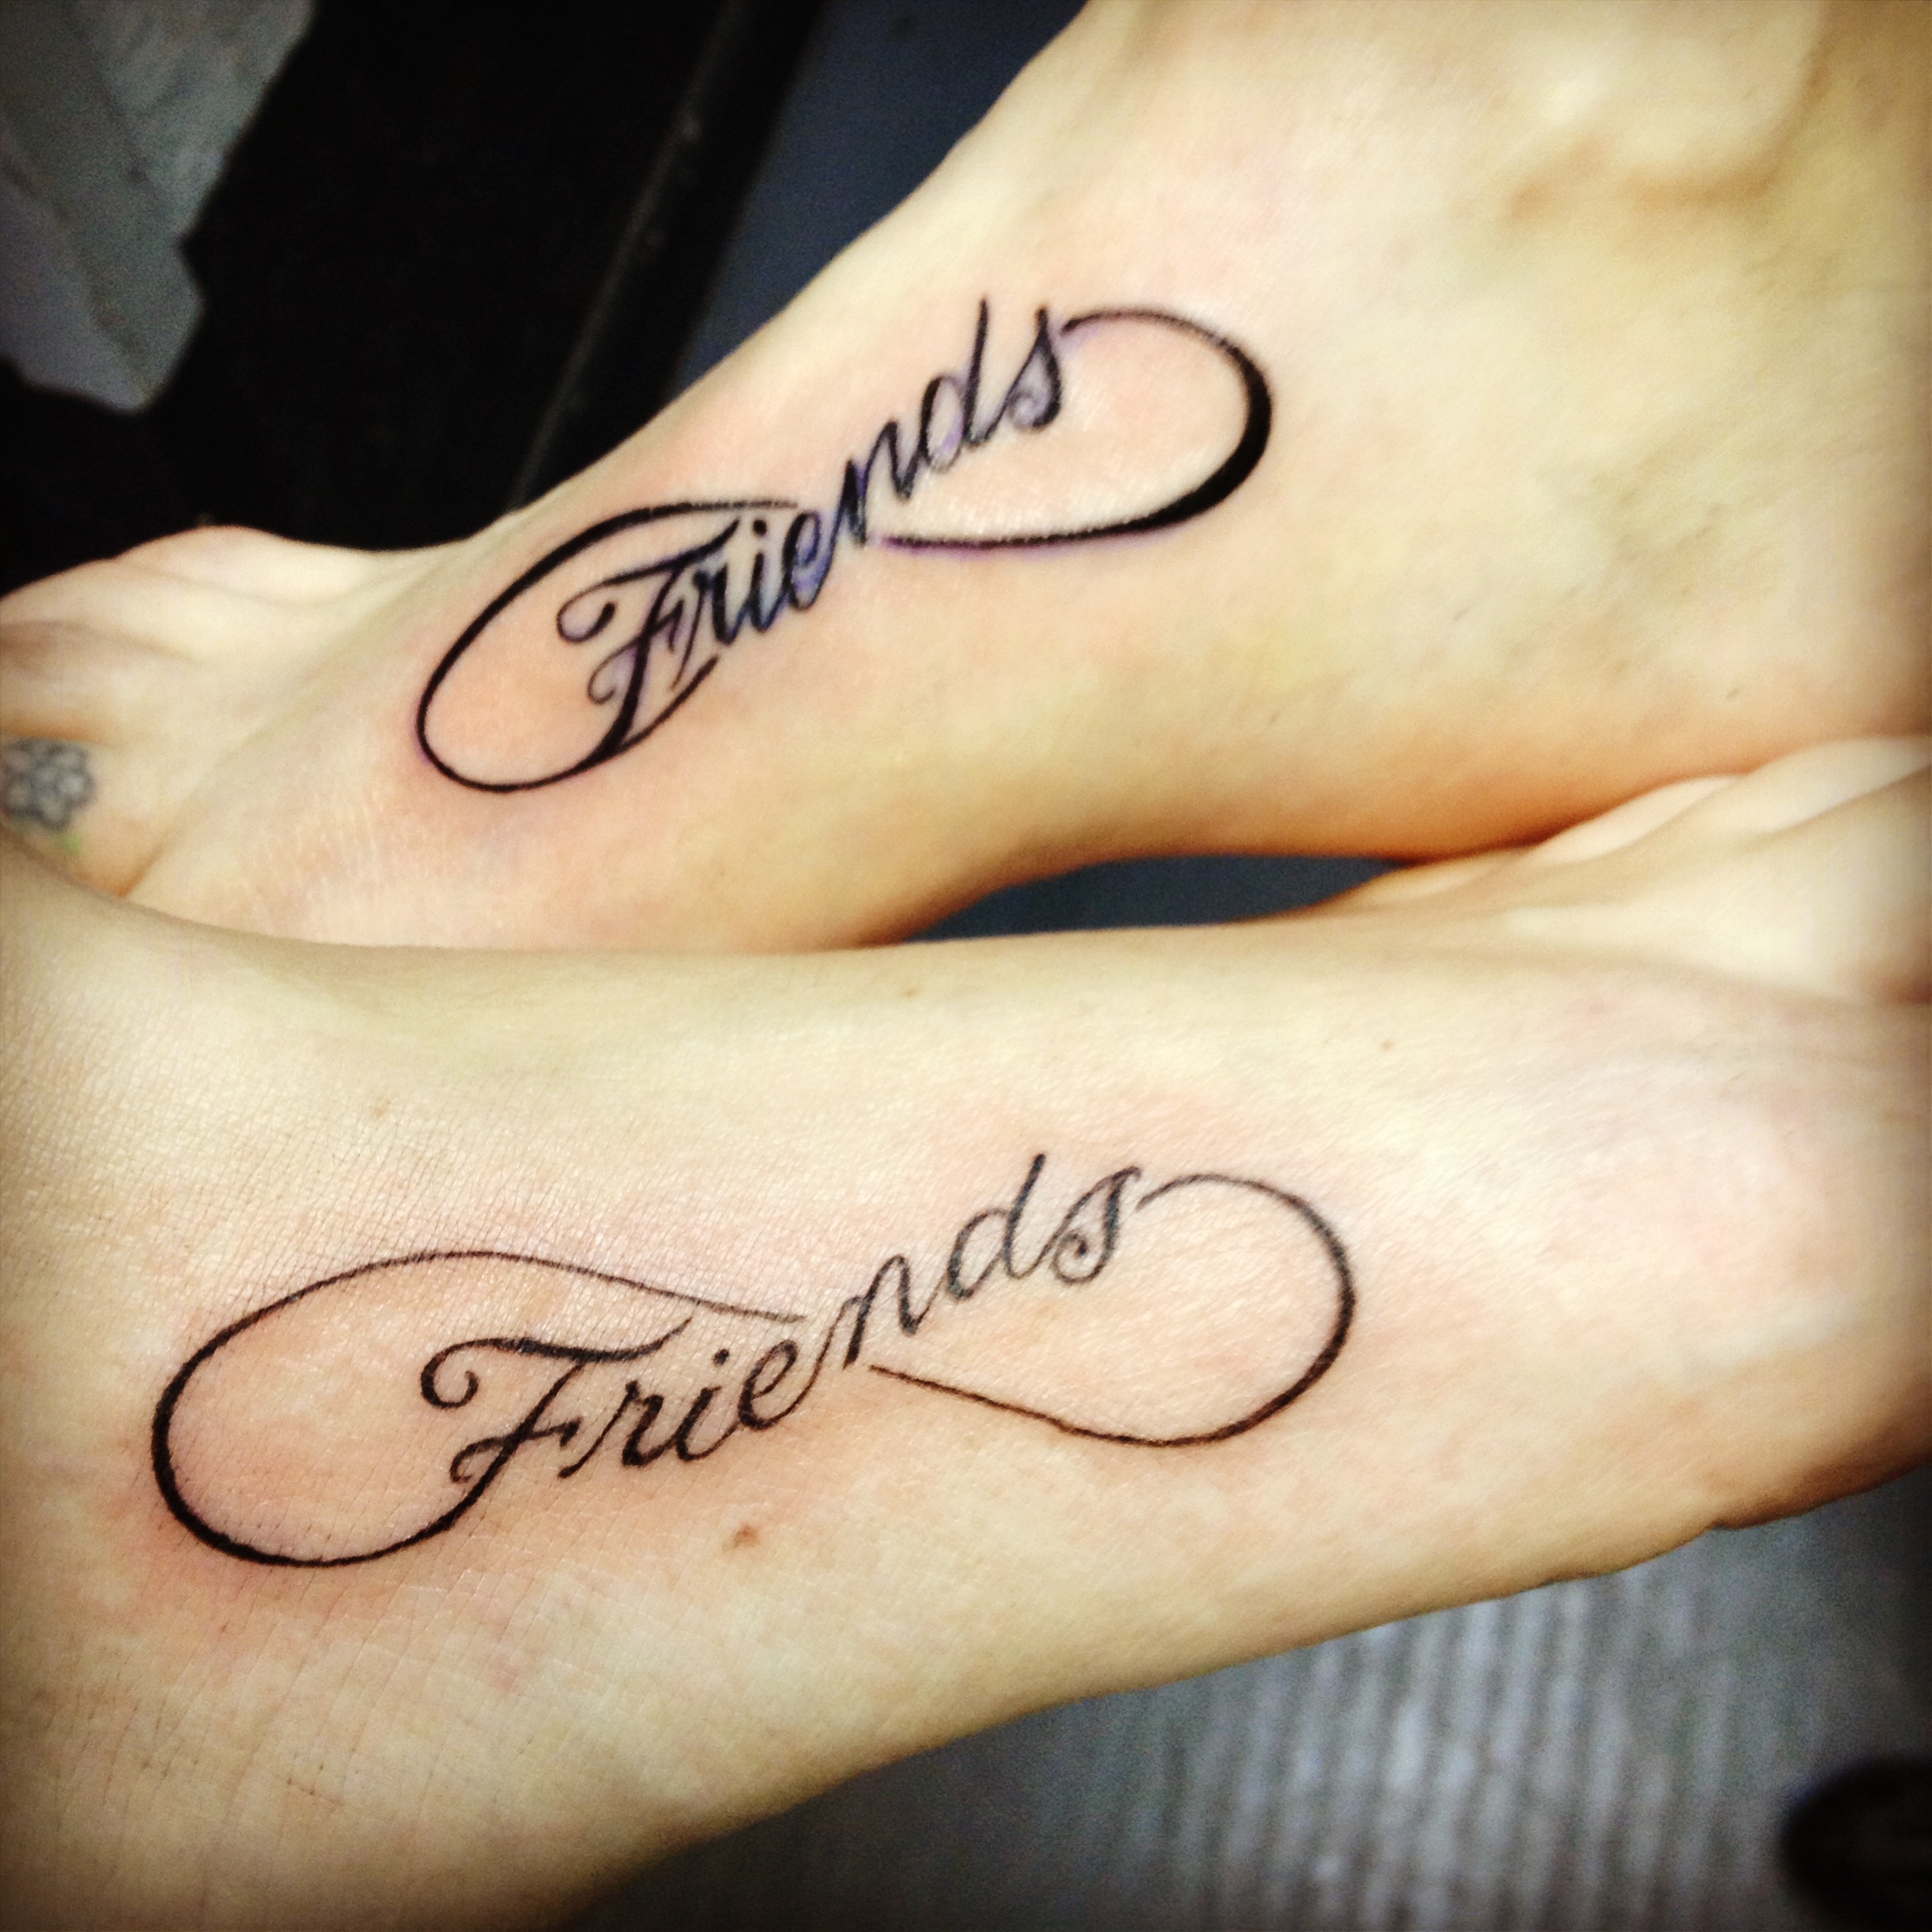 Tattoo uploaded by Sharon  The partner to go with my strength tattoo  This is friendship I had these two done as a way of a thankyou to my  friends who gave